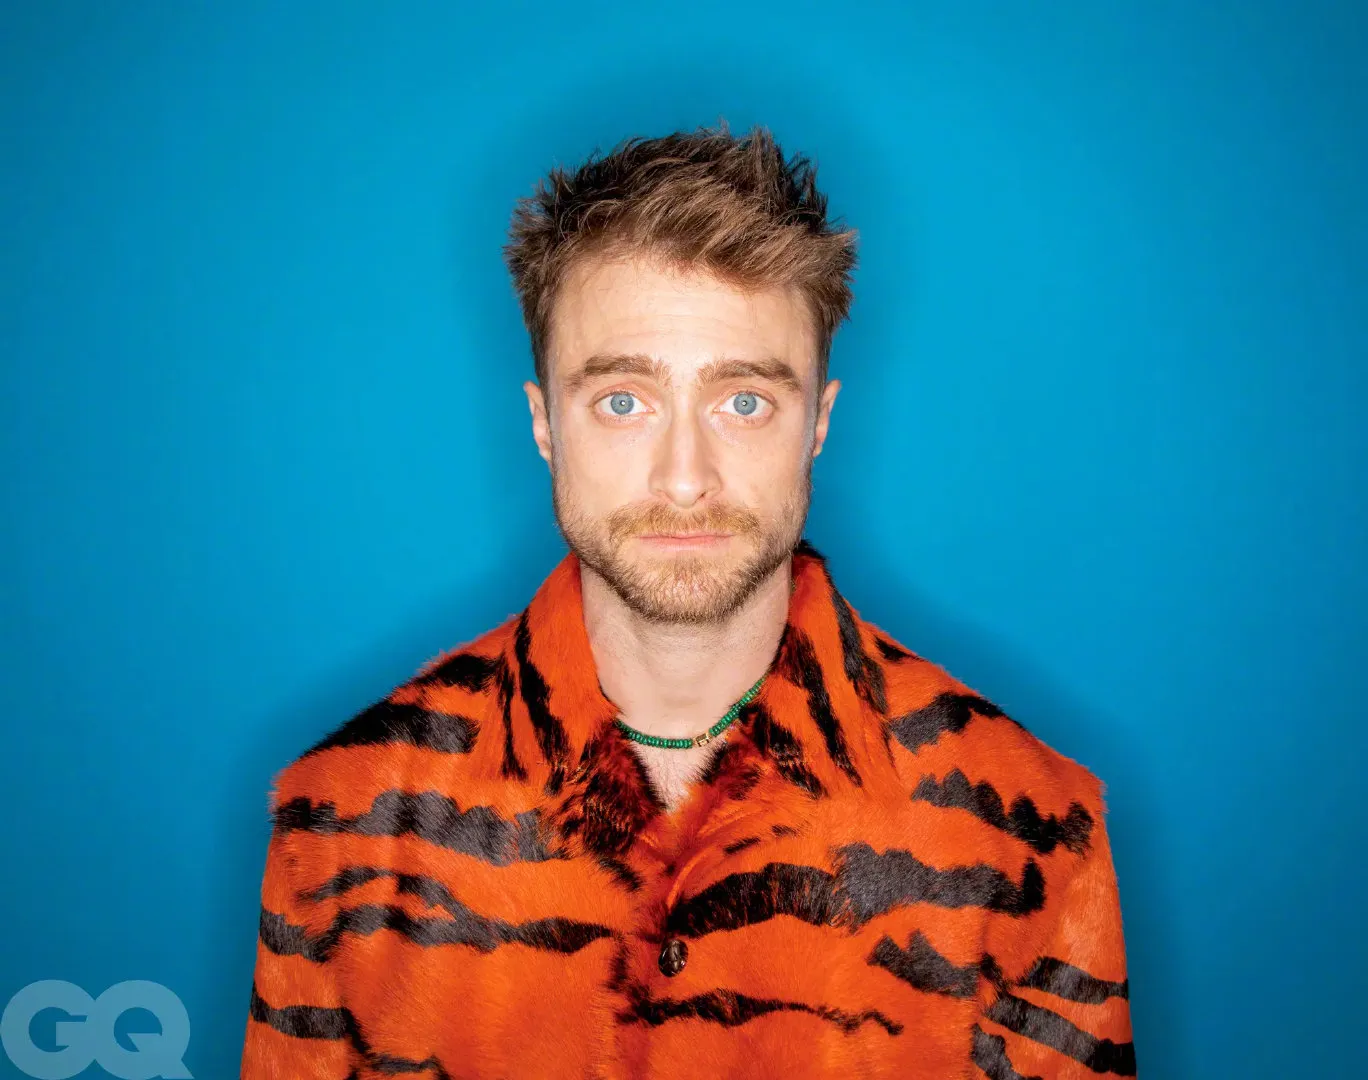 Daniel Radcliffe, photo in the October issue of 'GQ Hype' magazine | FMV6